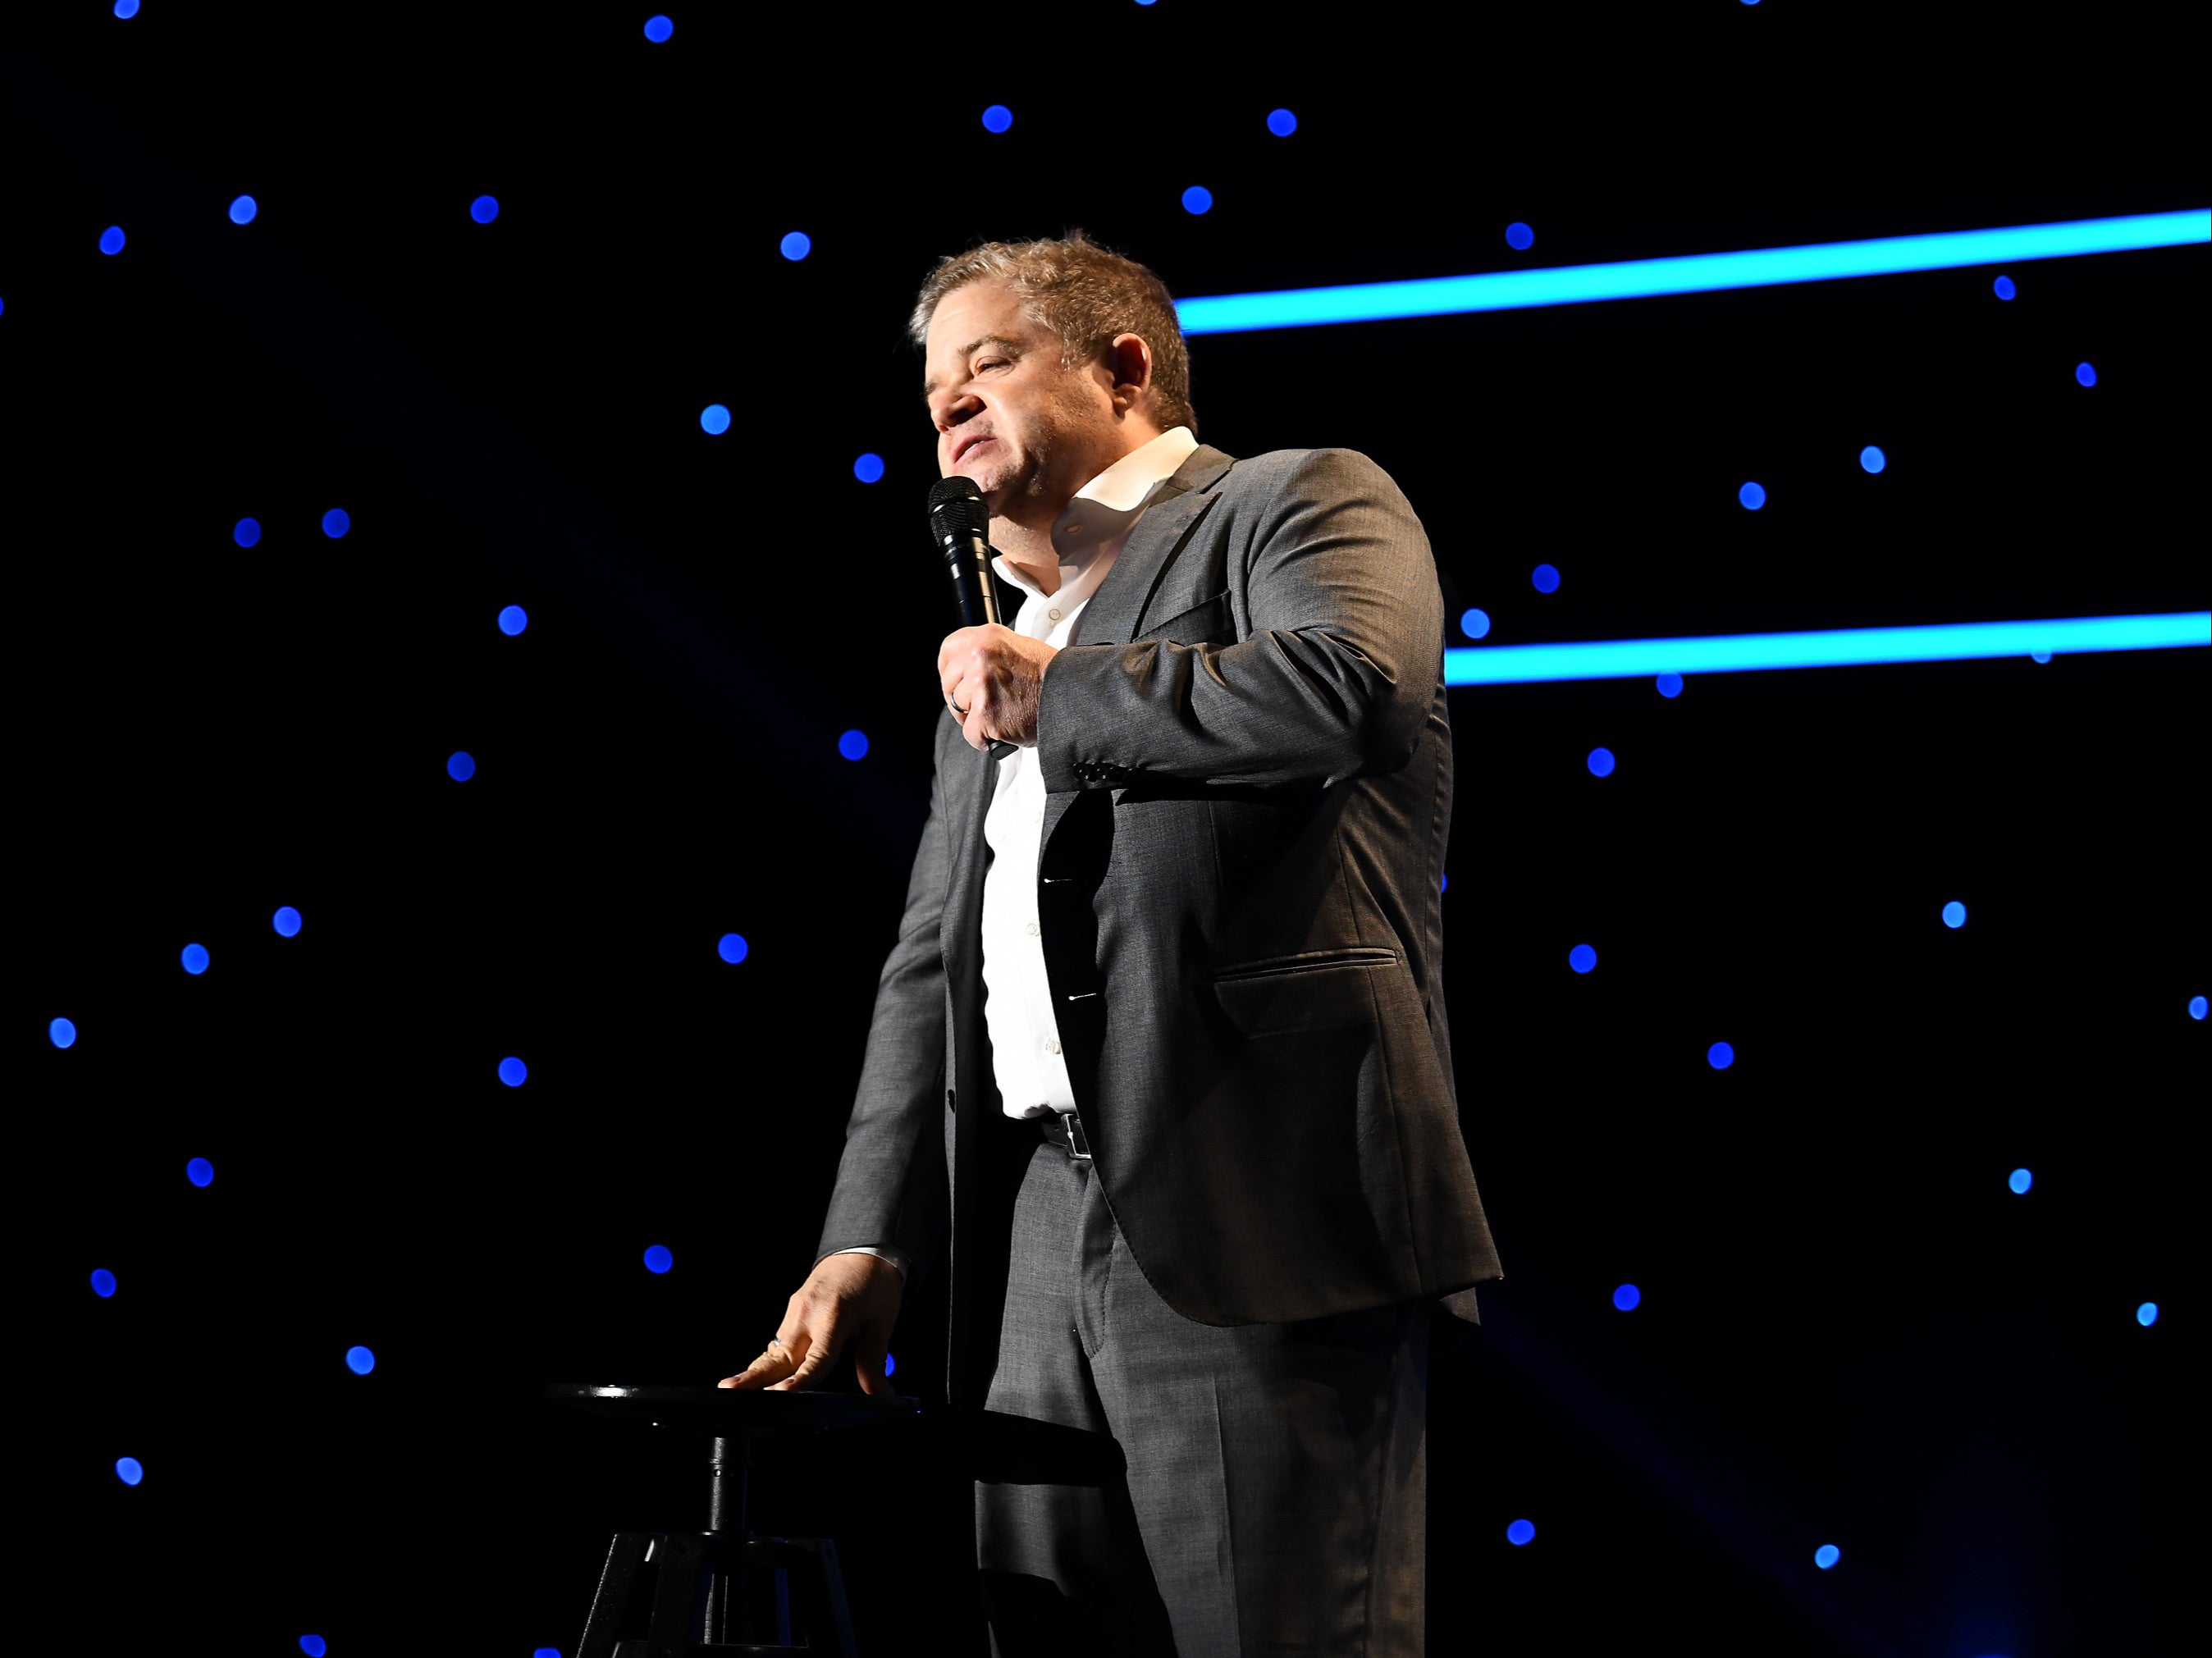 Patton Oswalt’s stand-up show ‘We All Scream’ is coming to Netflix